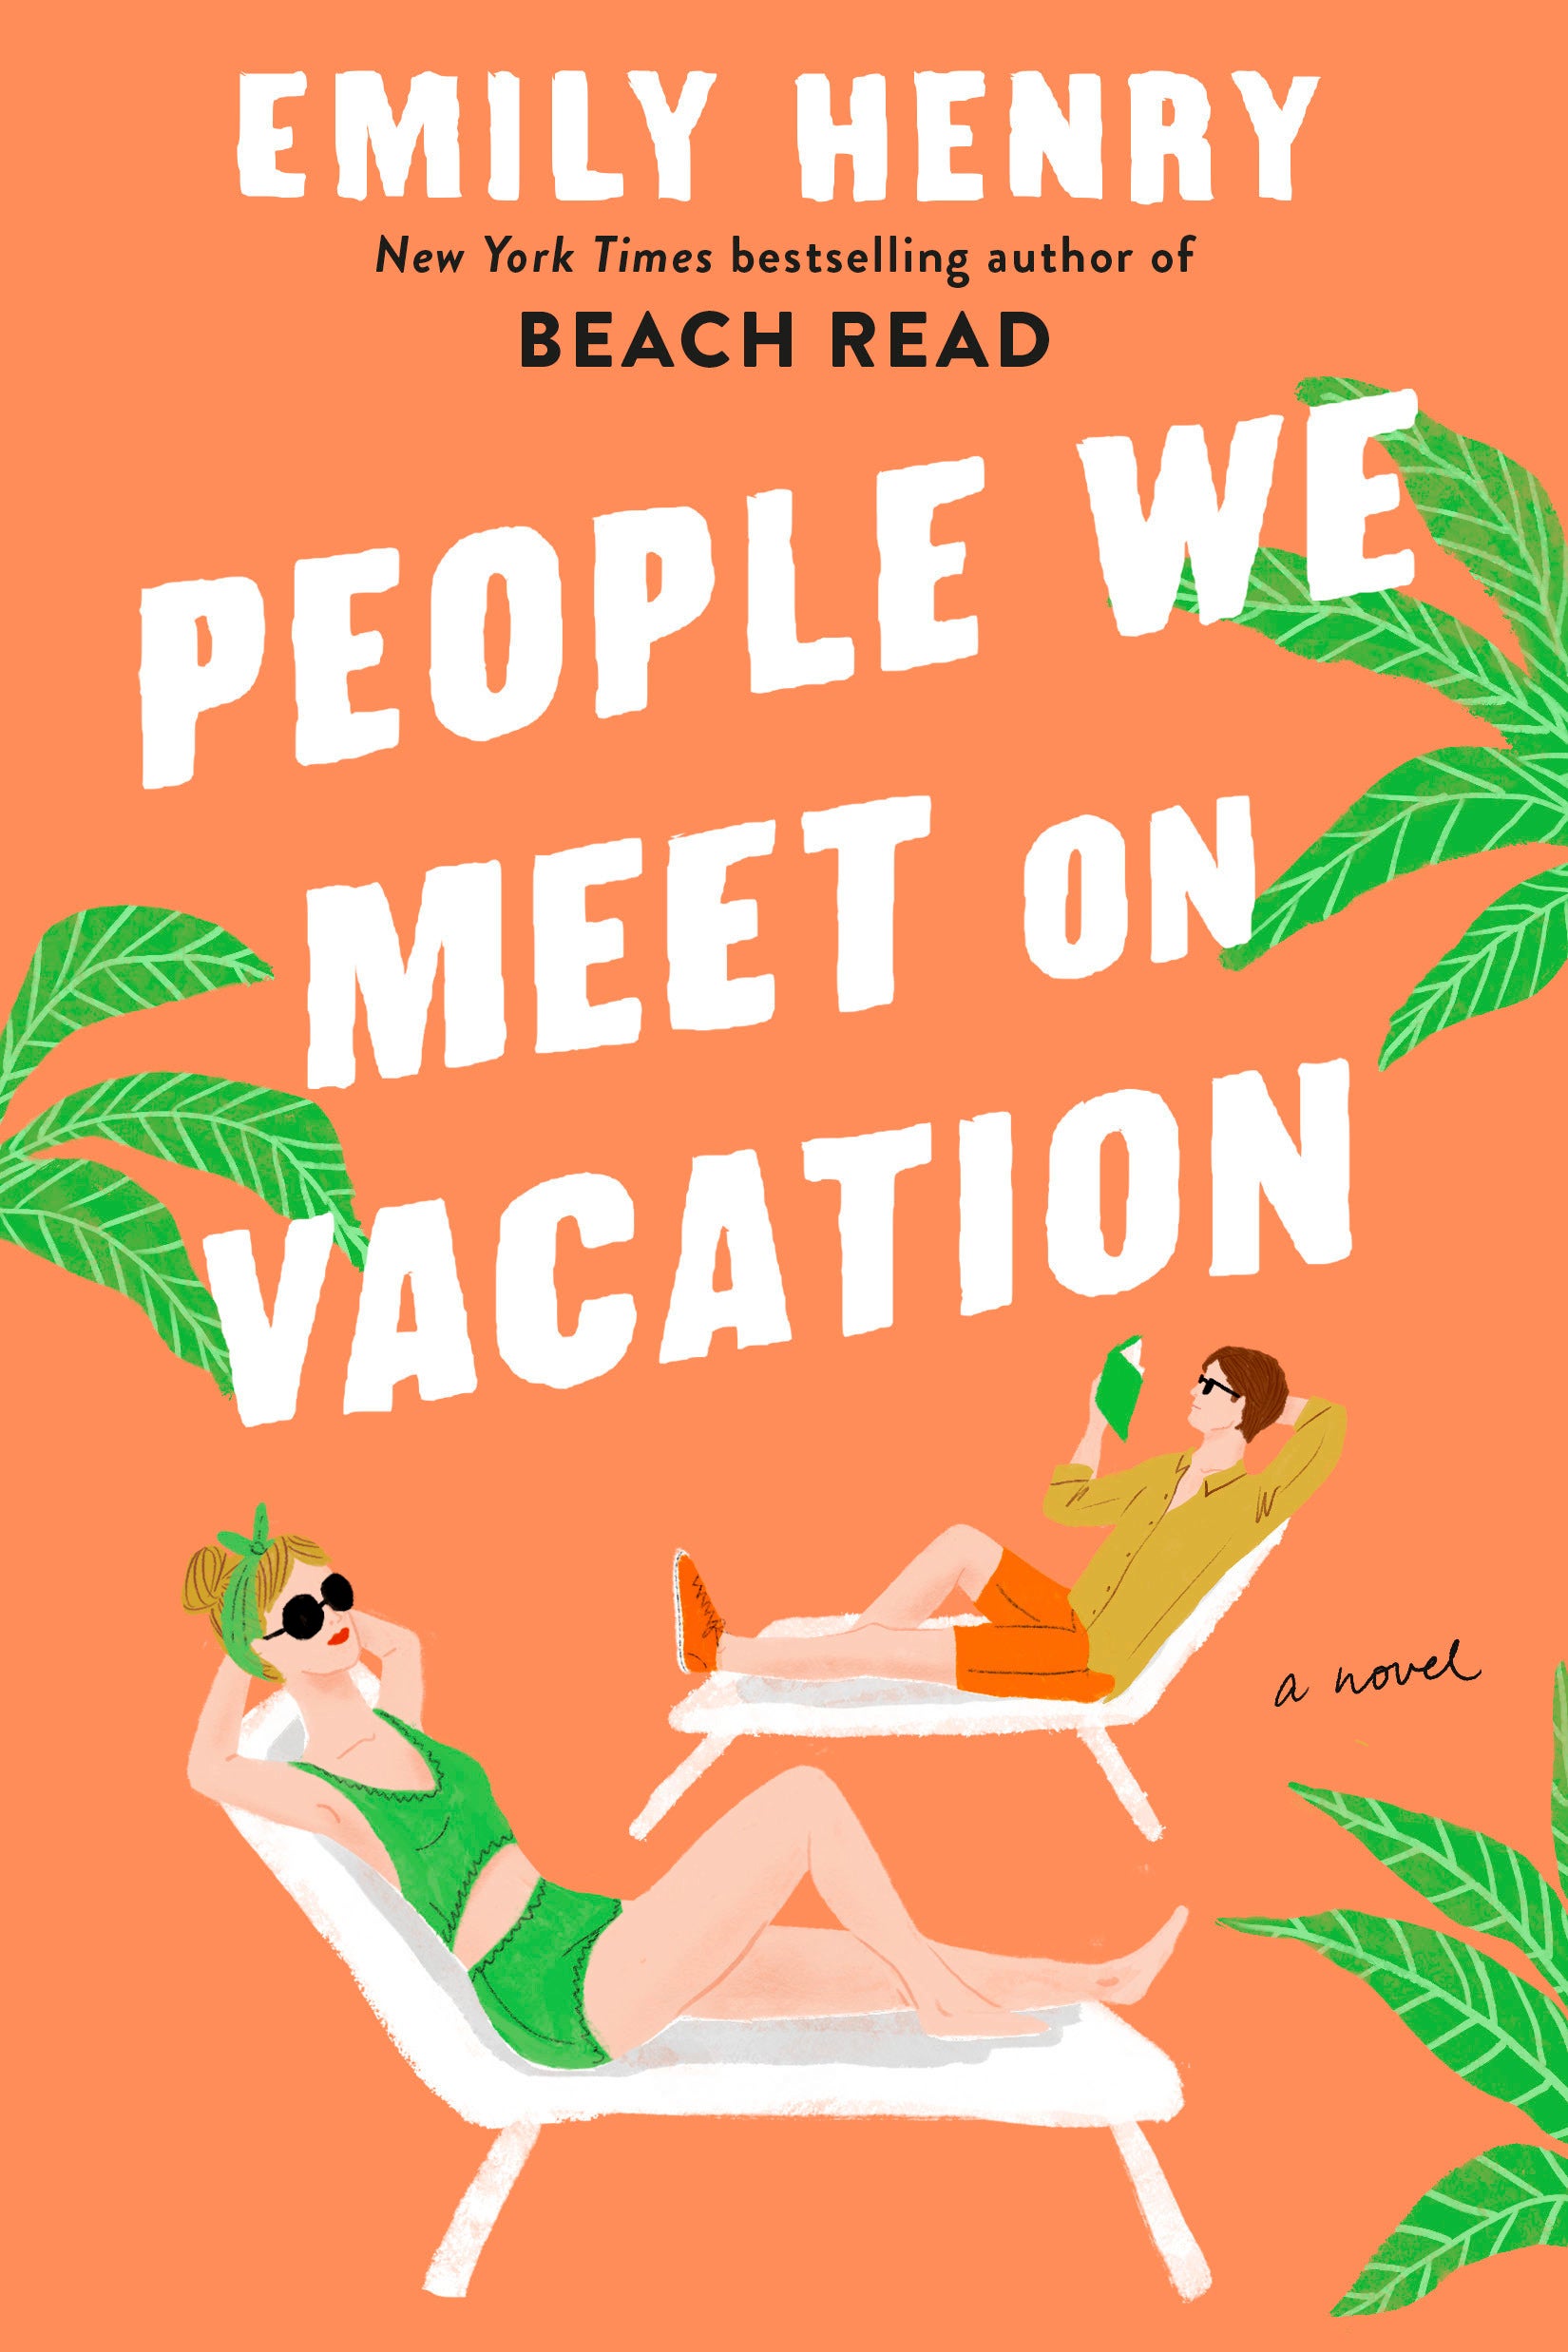 Book Review - People We Meet On Vacation